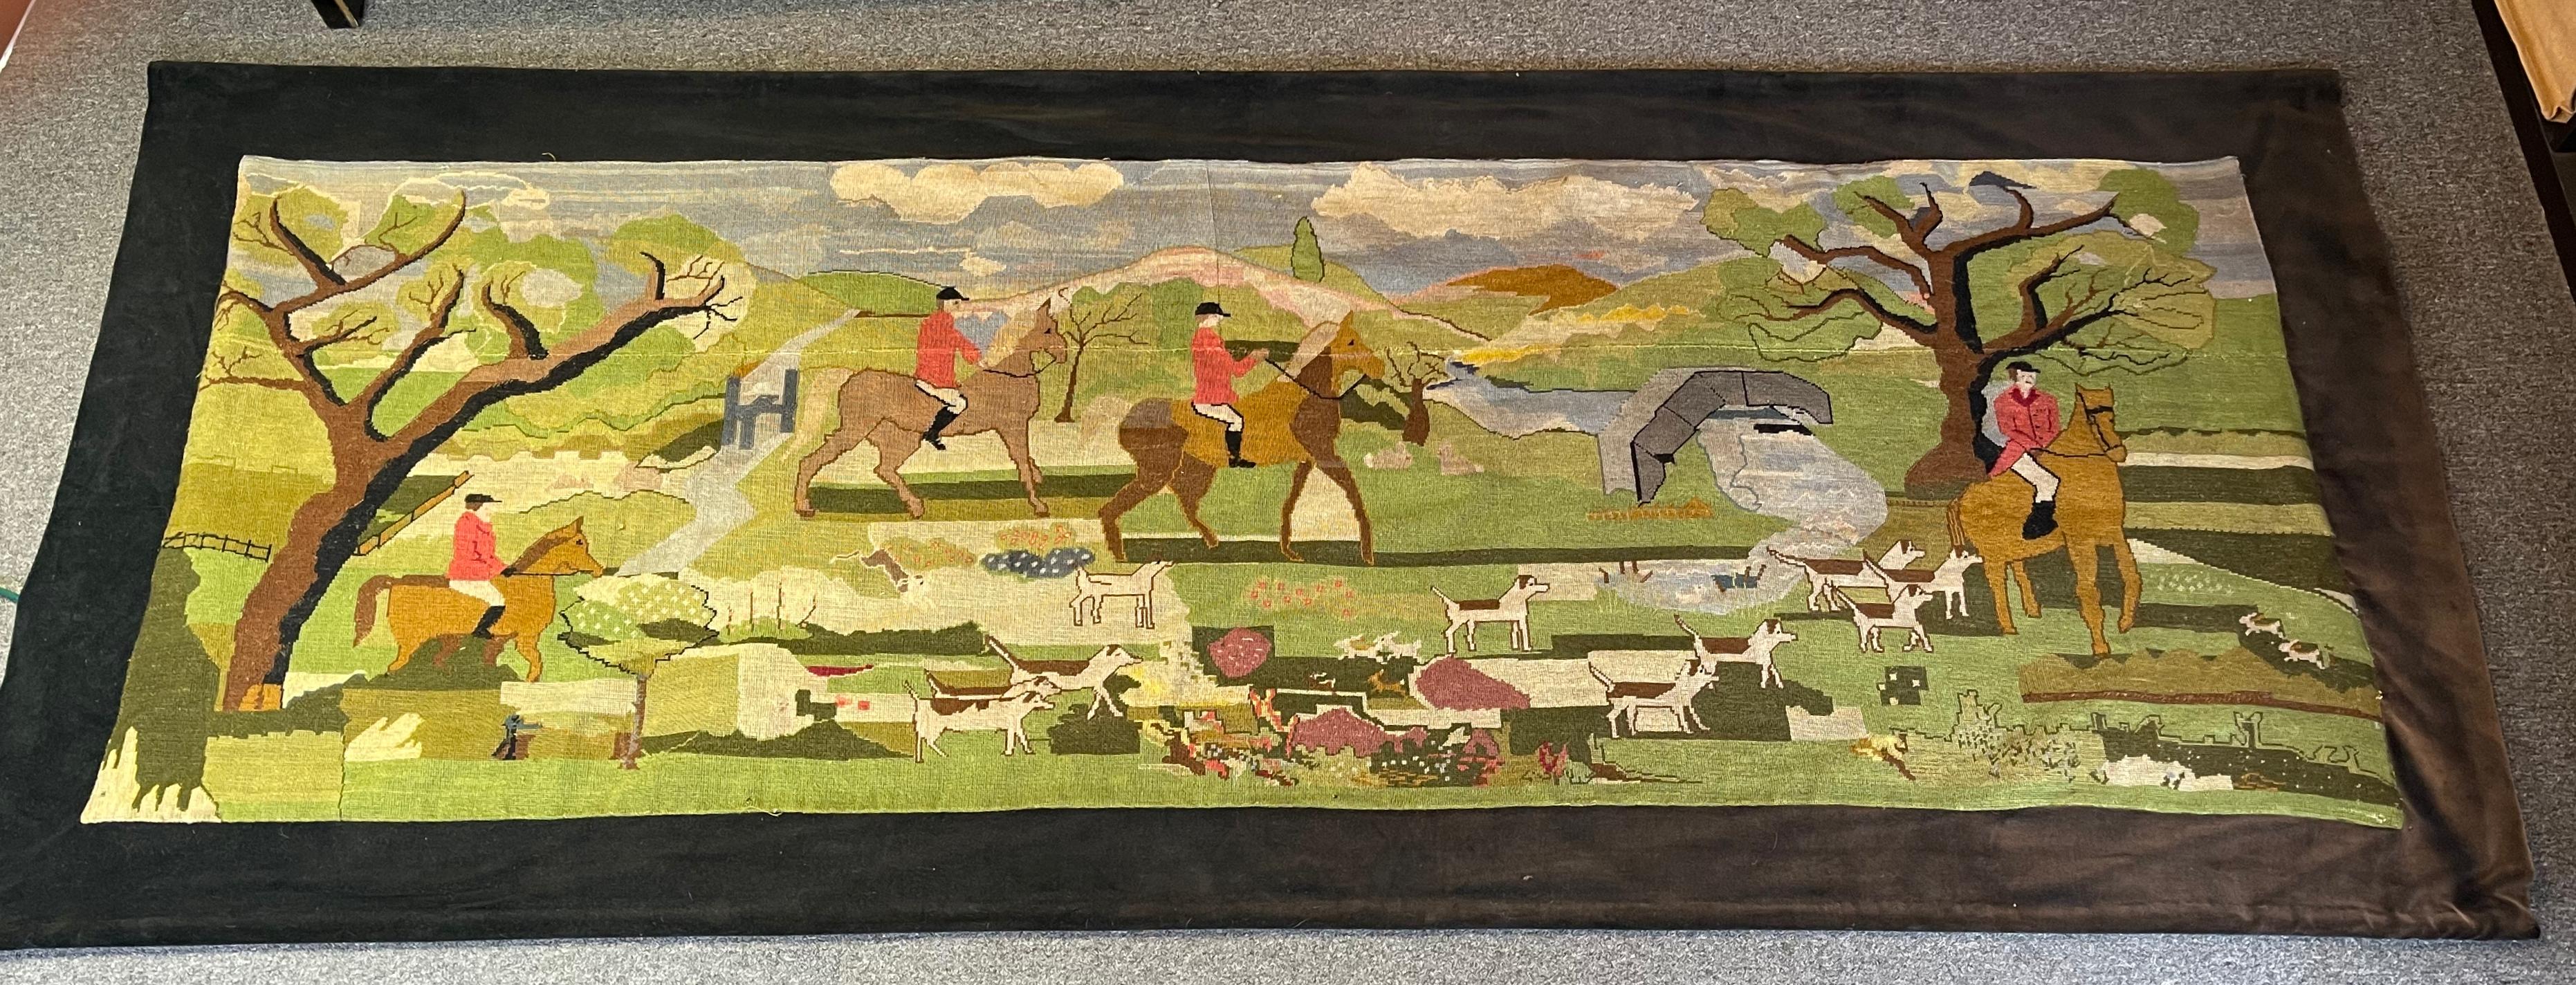 Large Hunt-Themed Needlepoint Wall Hanging In Good Condition For Sale In Kilmarnock, VA